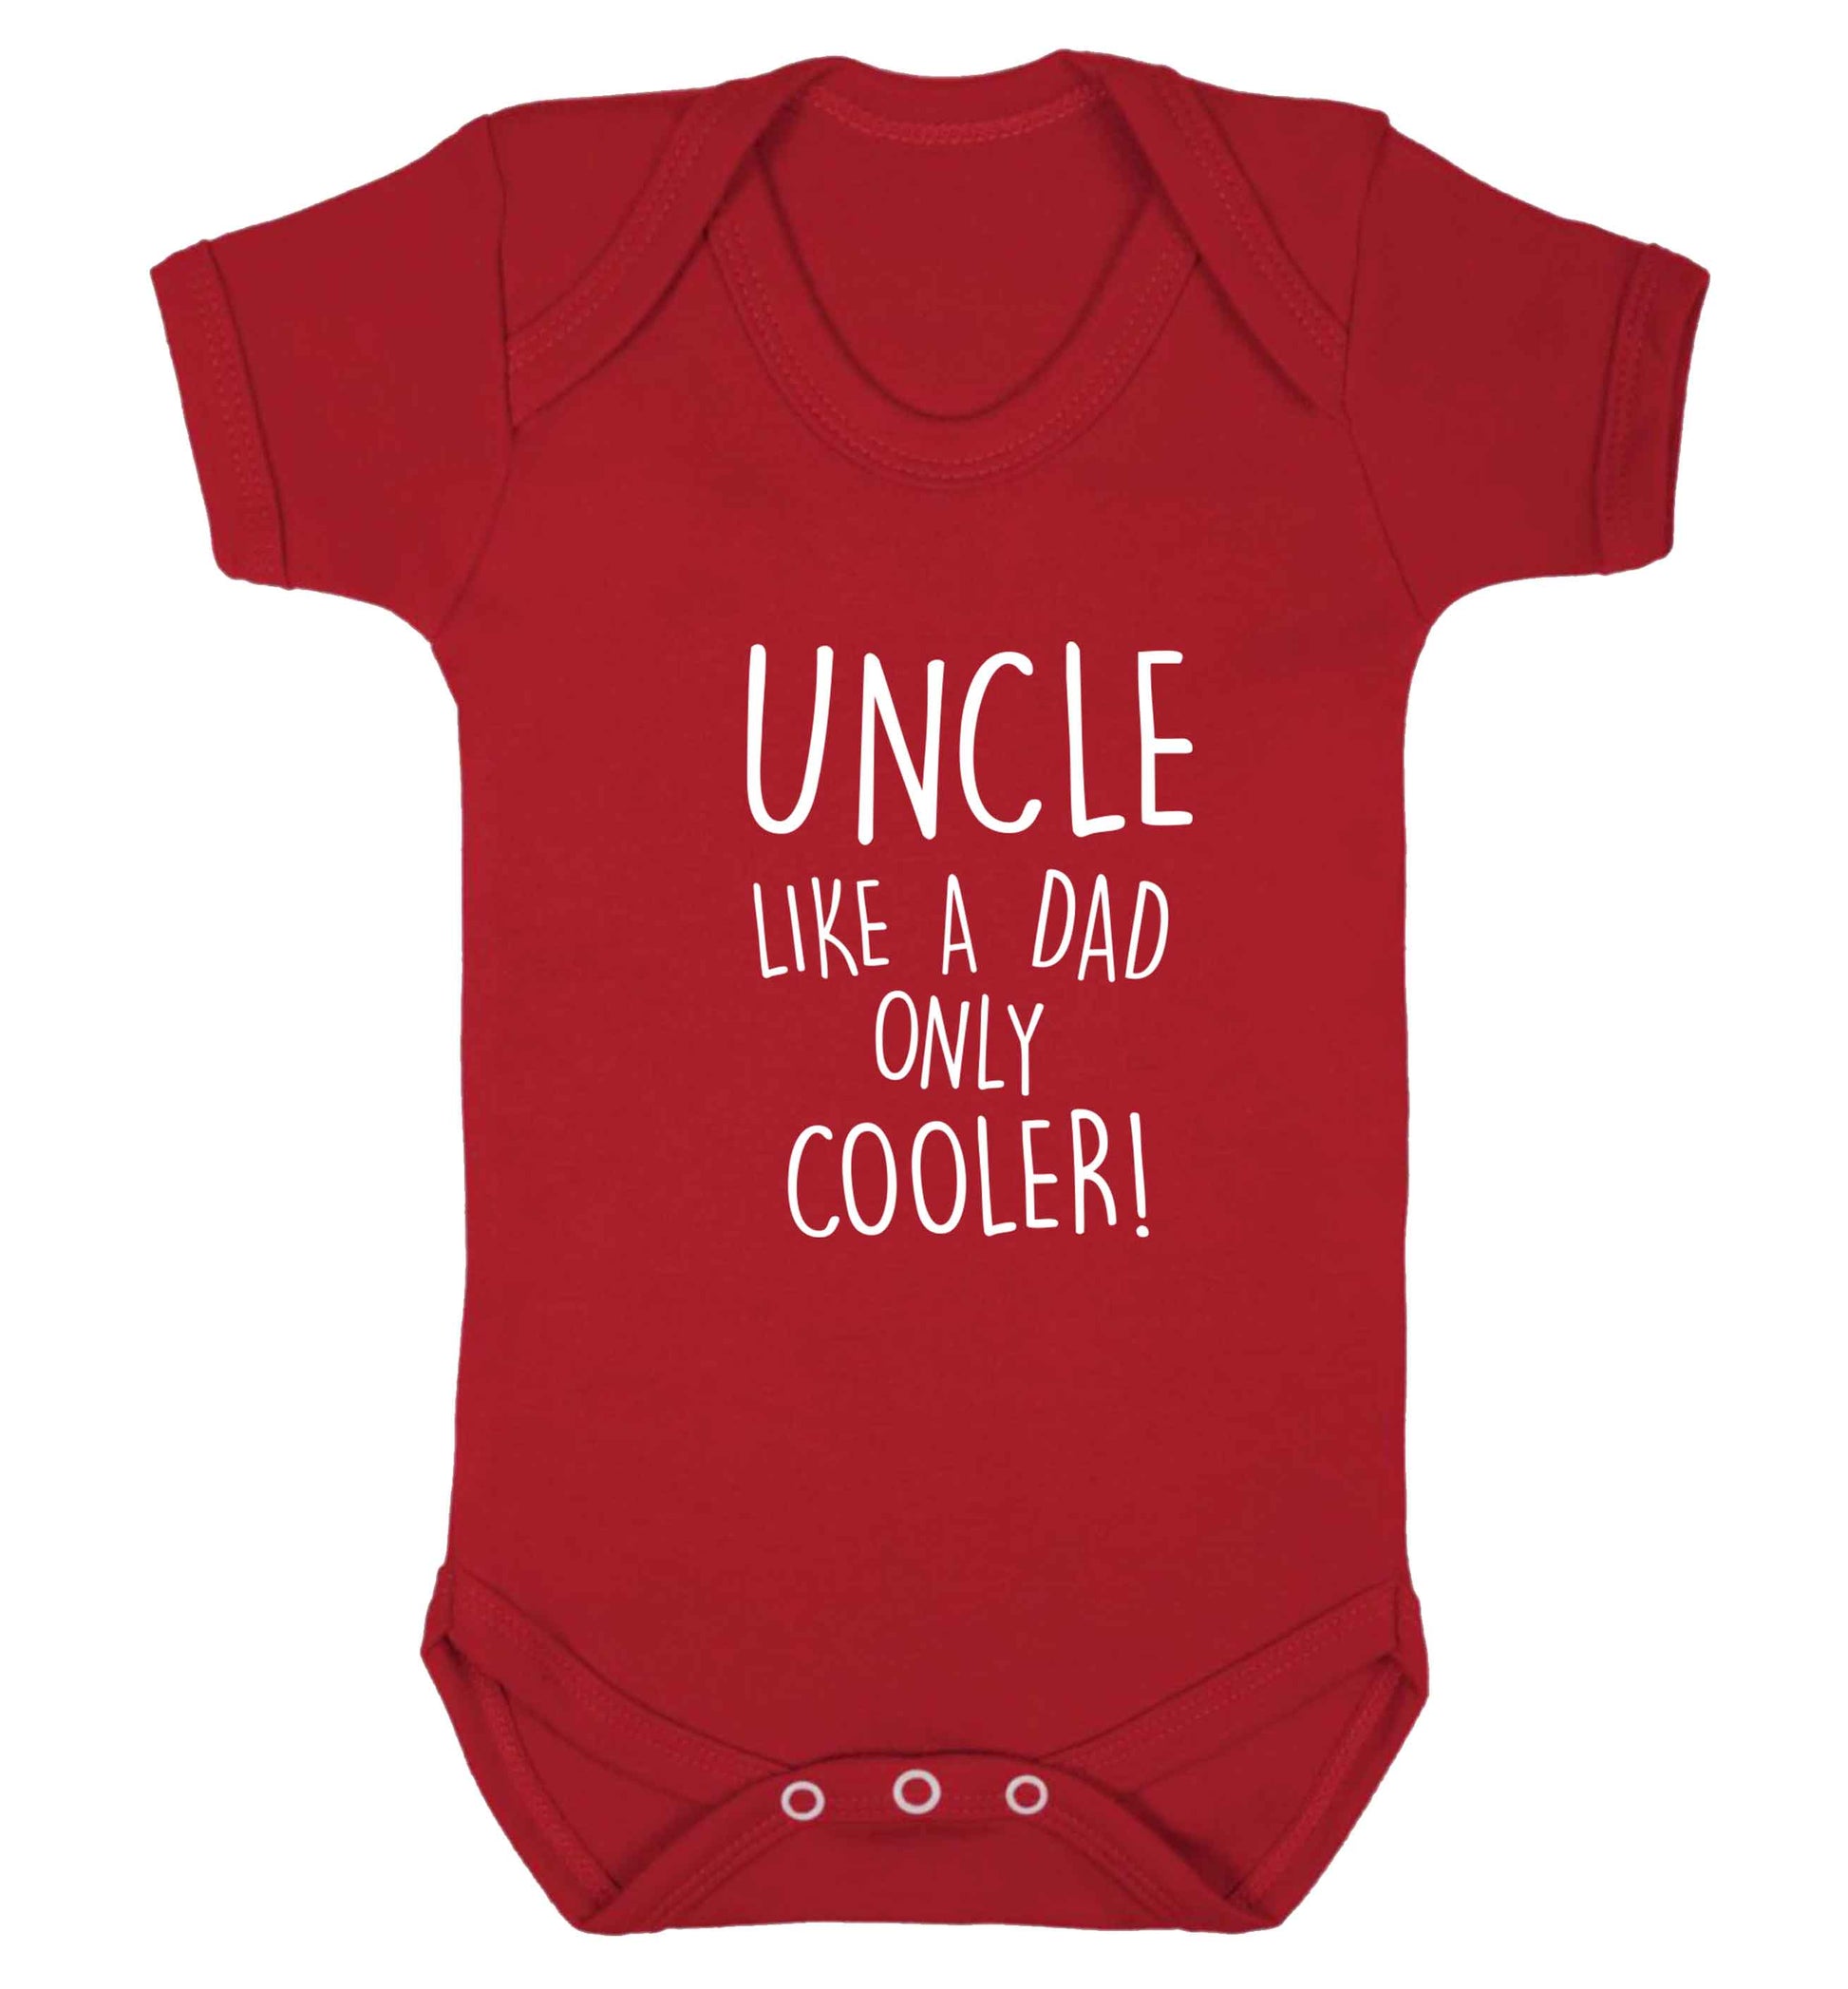 Uncle like a dad only cooler baby vest red 18-24 months